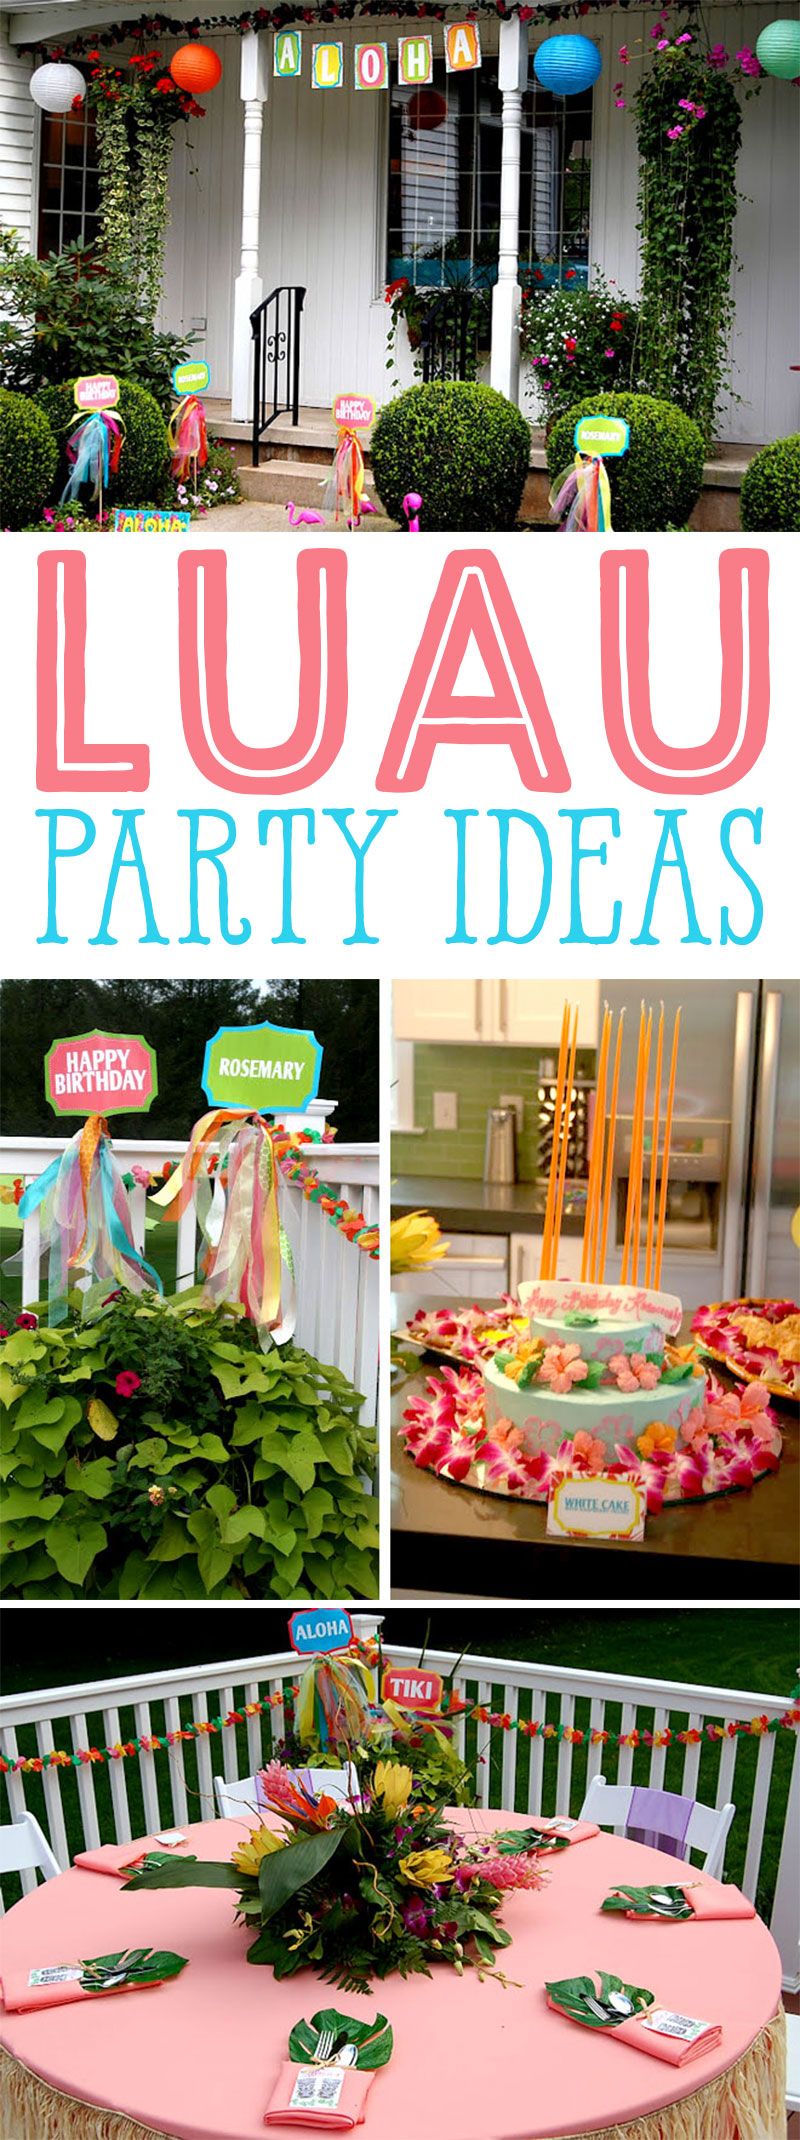 Luau Birthday Party Ideas on Love The Day